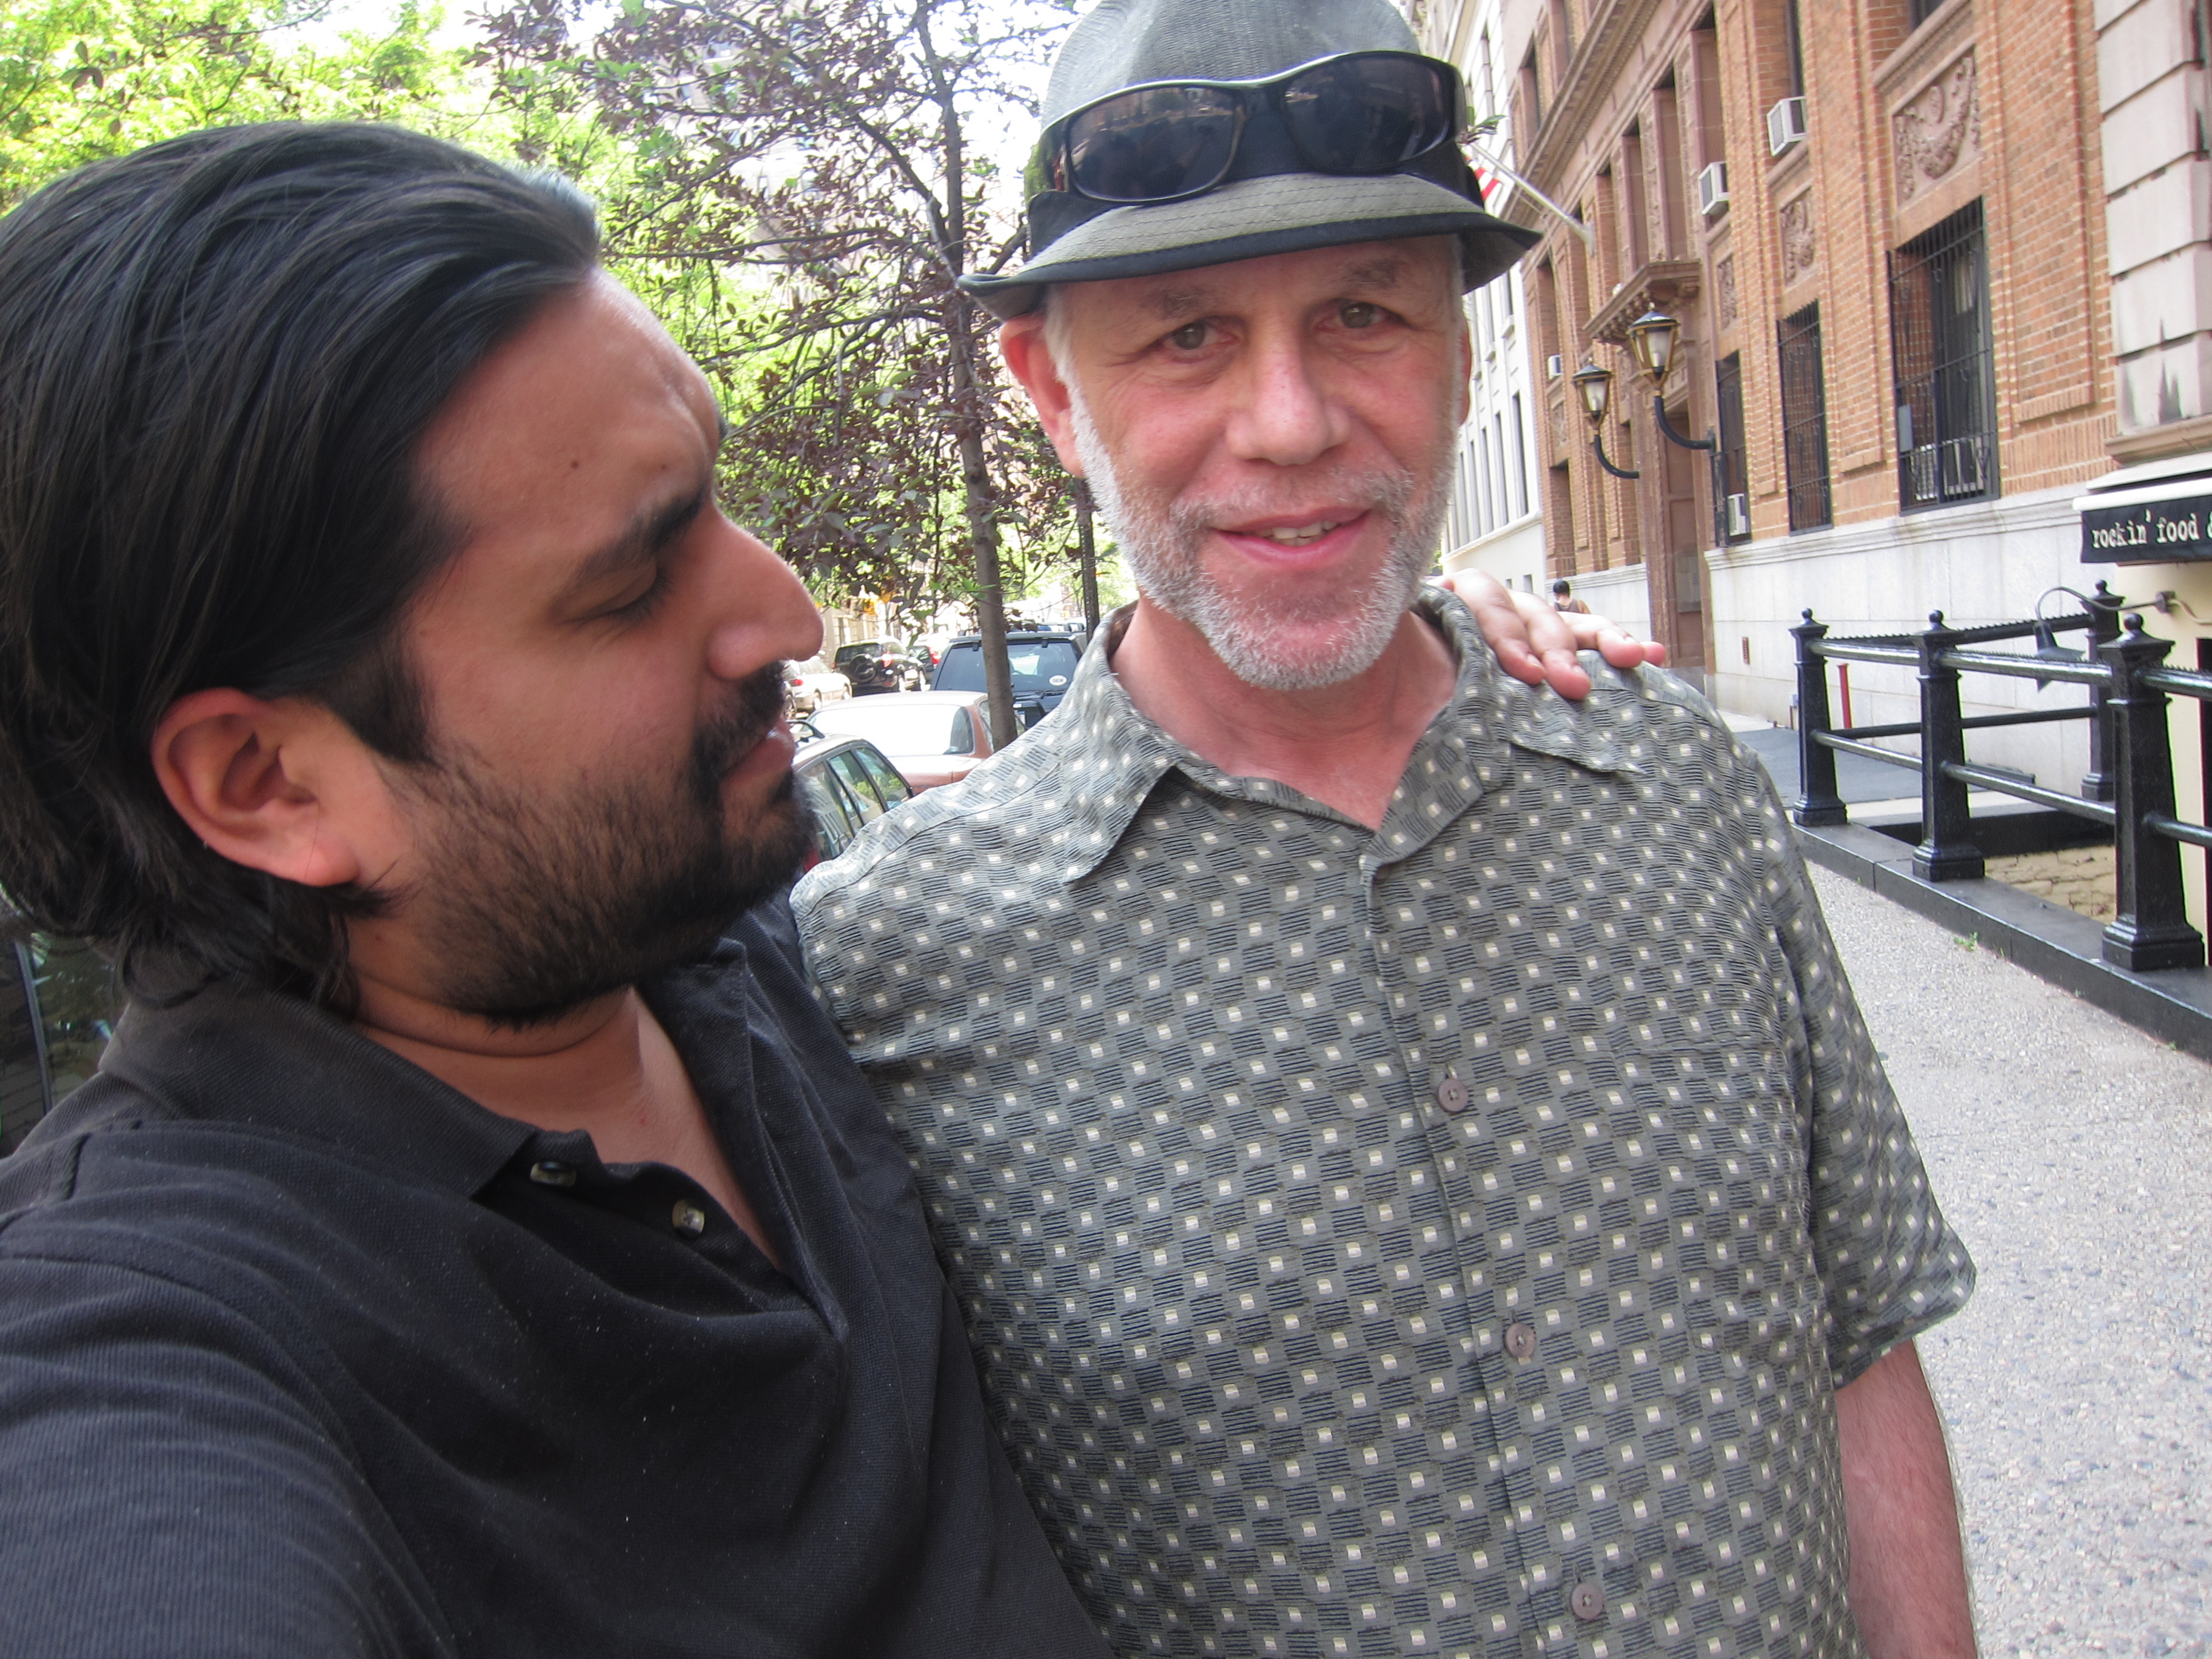 Al Burgo (Searching for Bobby D, Trust Me, The Last Gamble) and Ronnie Banerjee on the set of Night Bird